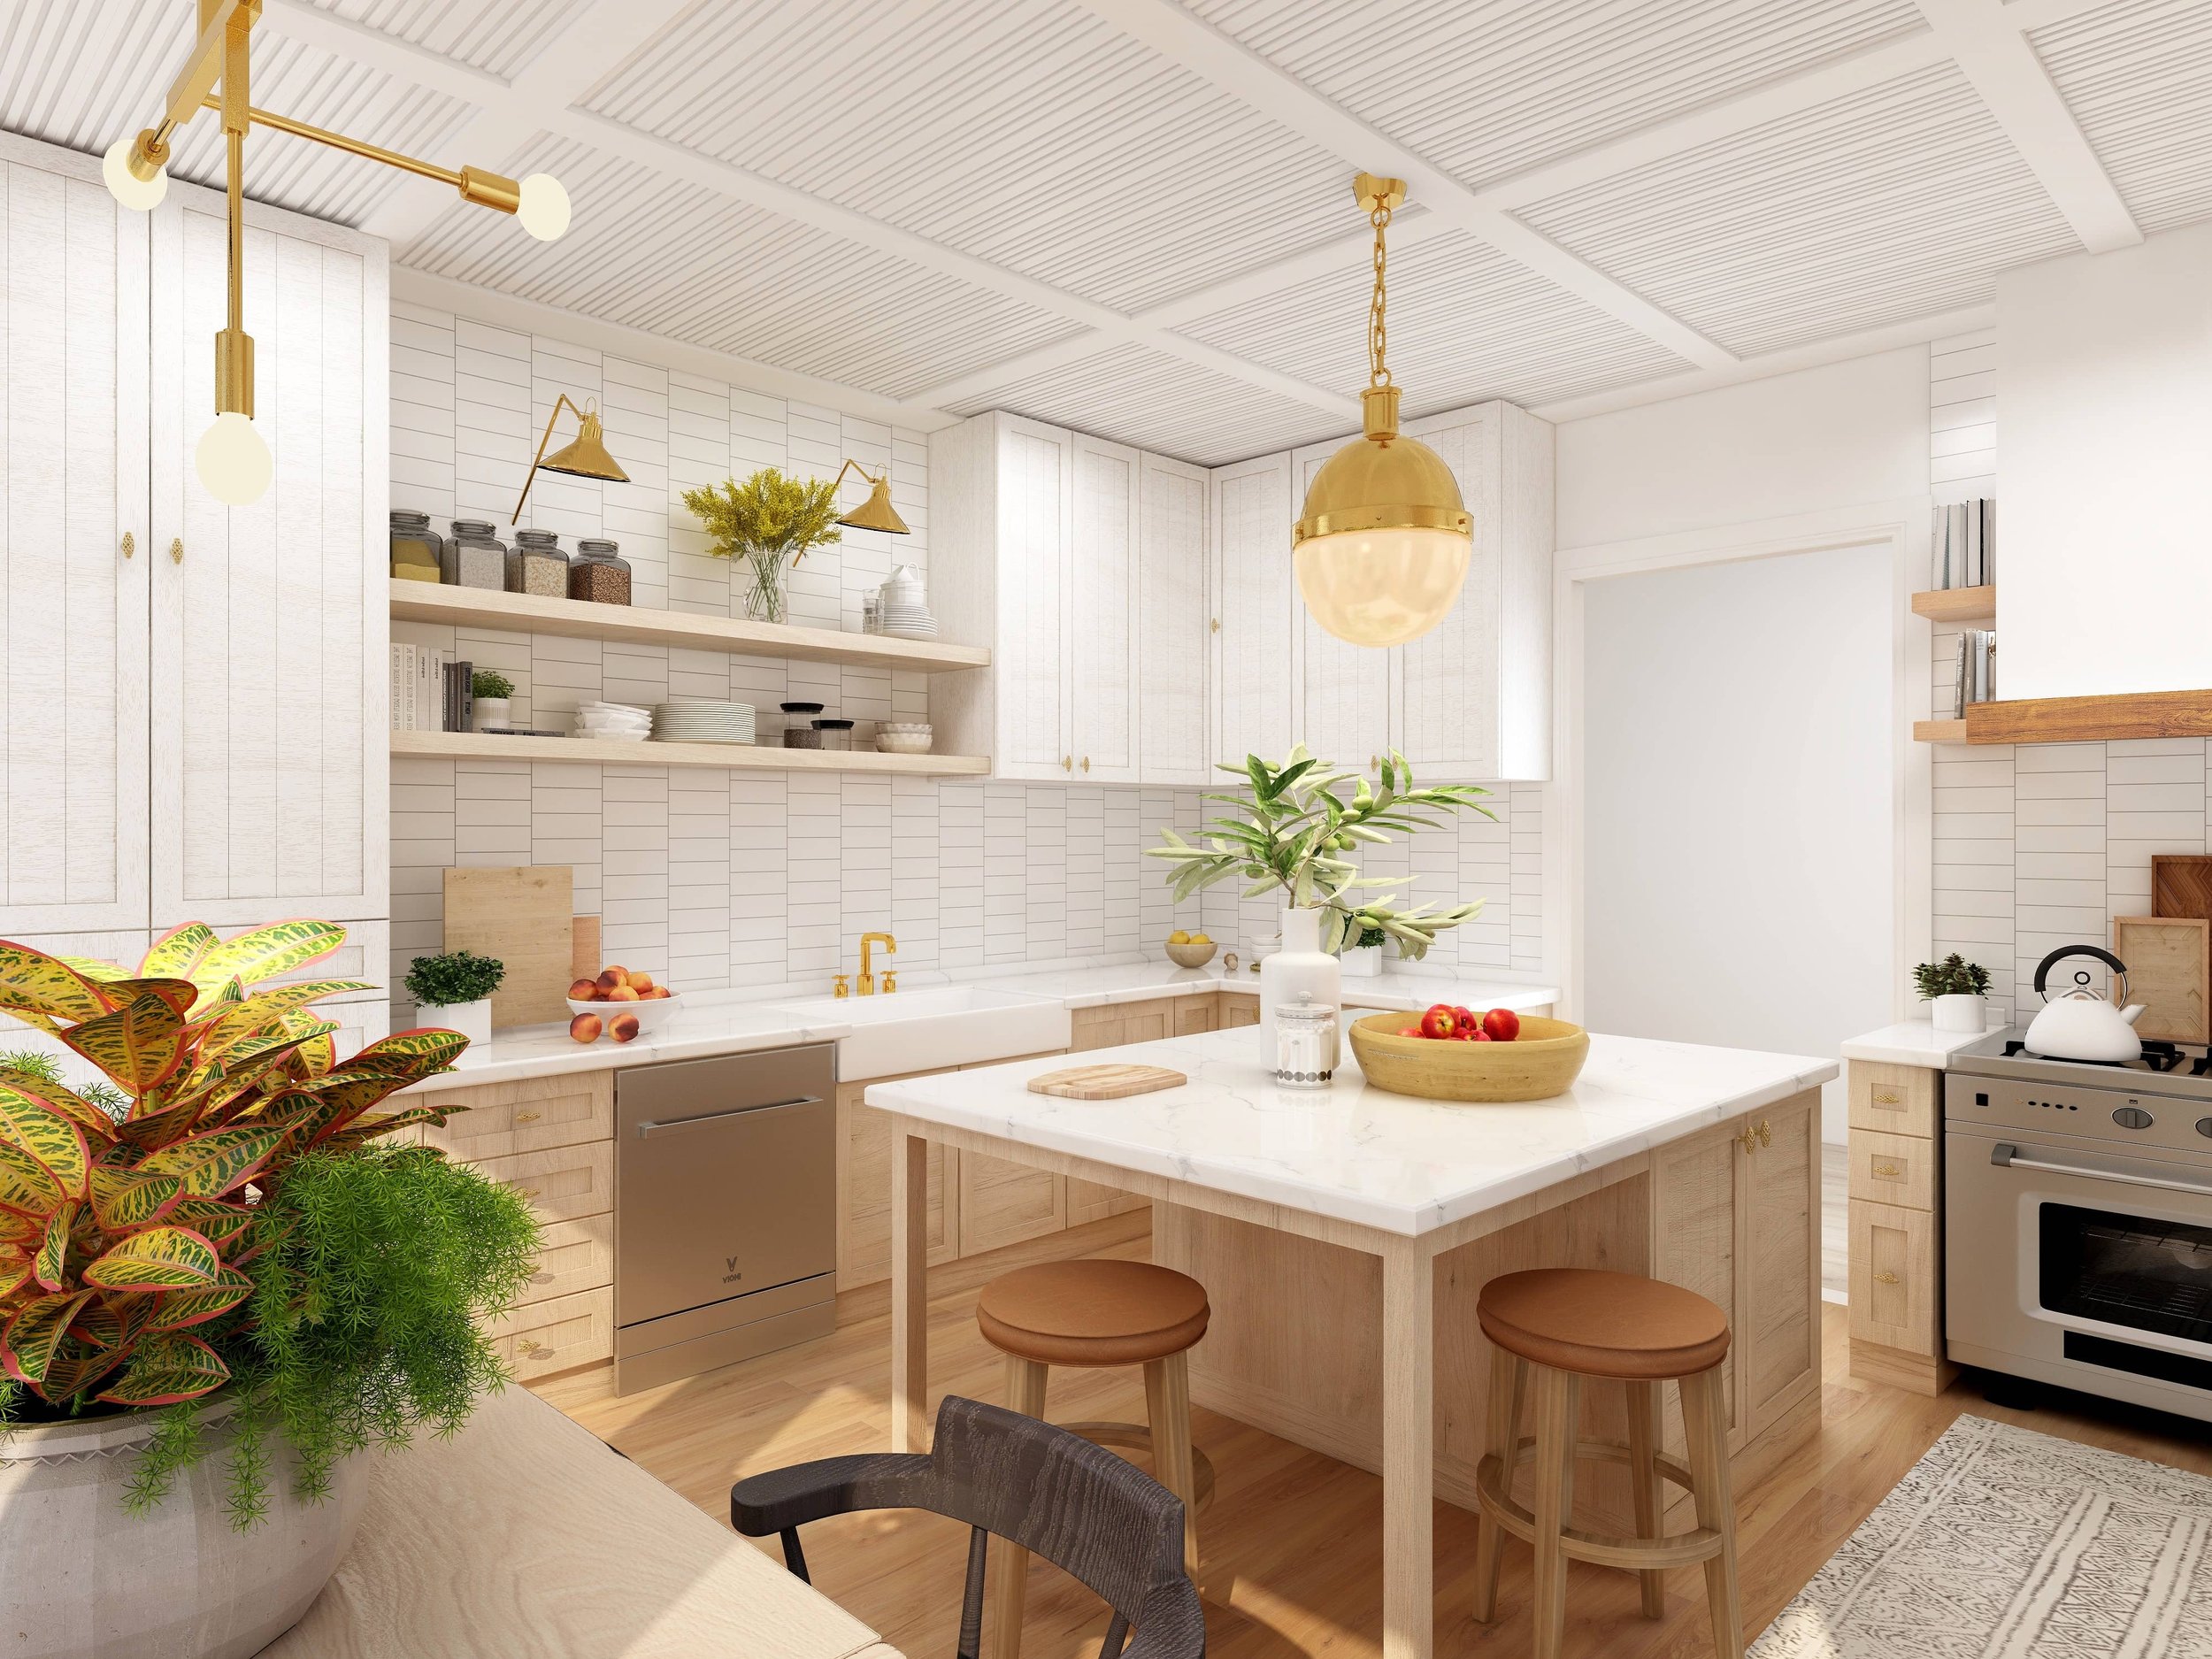 Farmhouse Kitchen with white walls and features